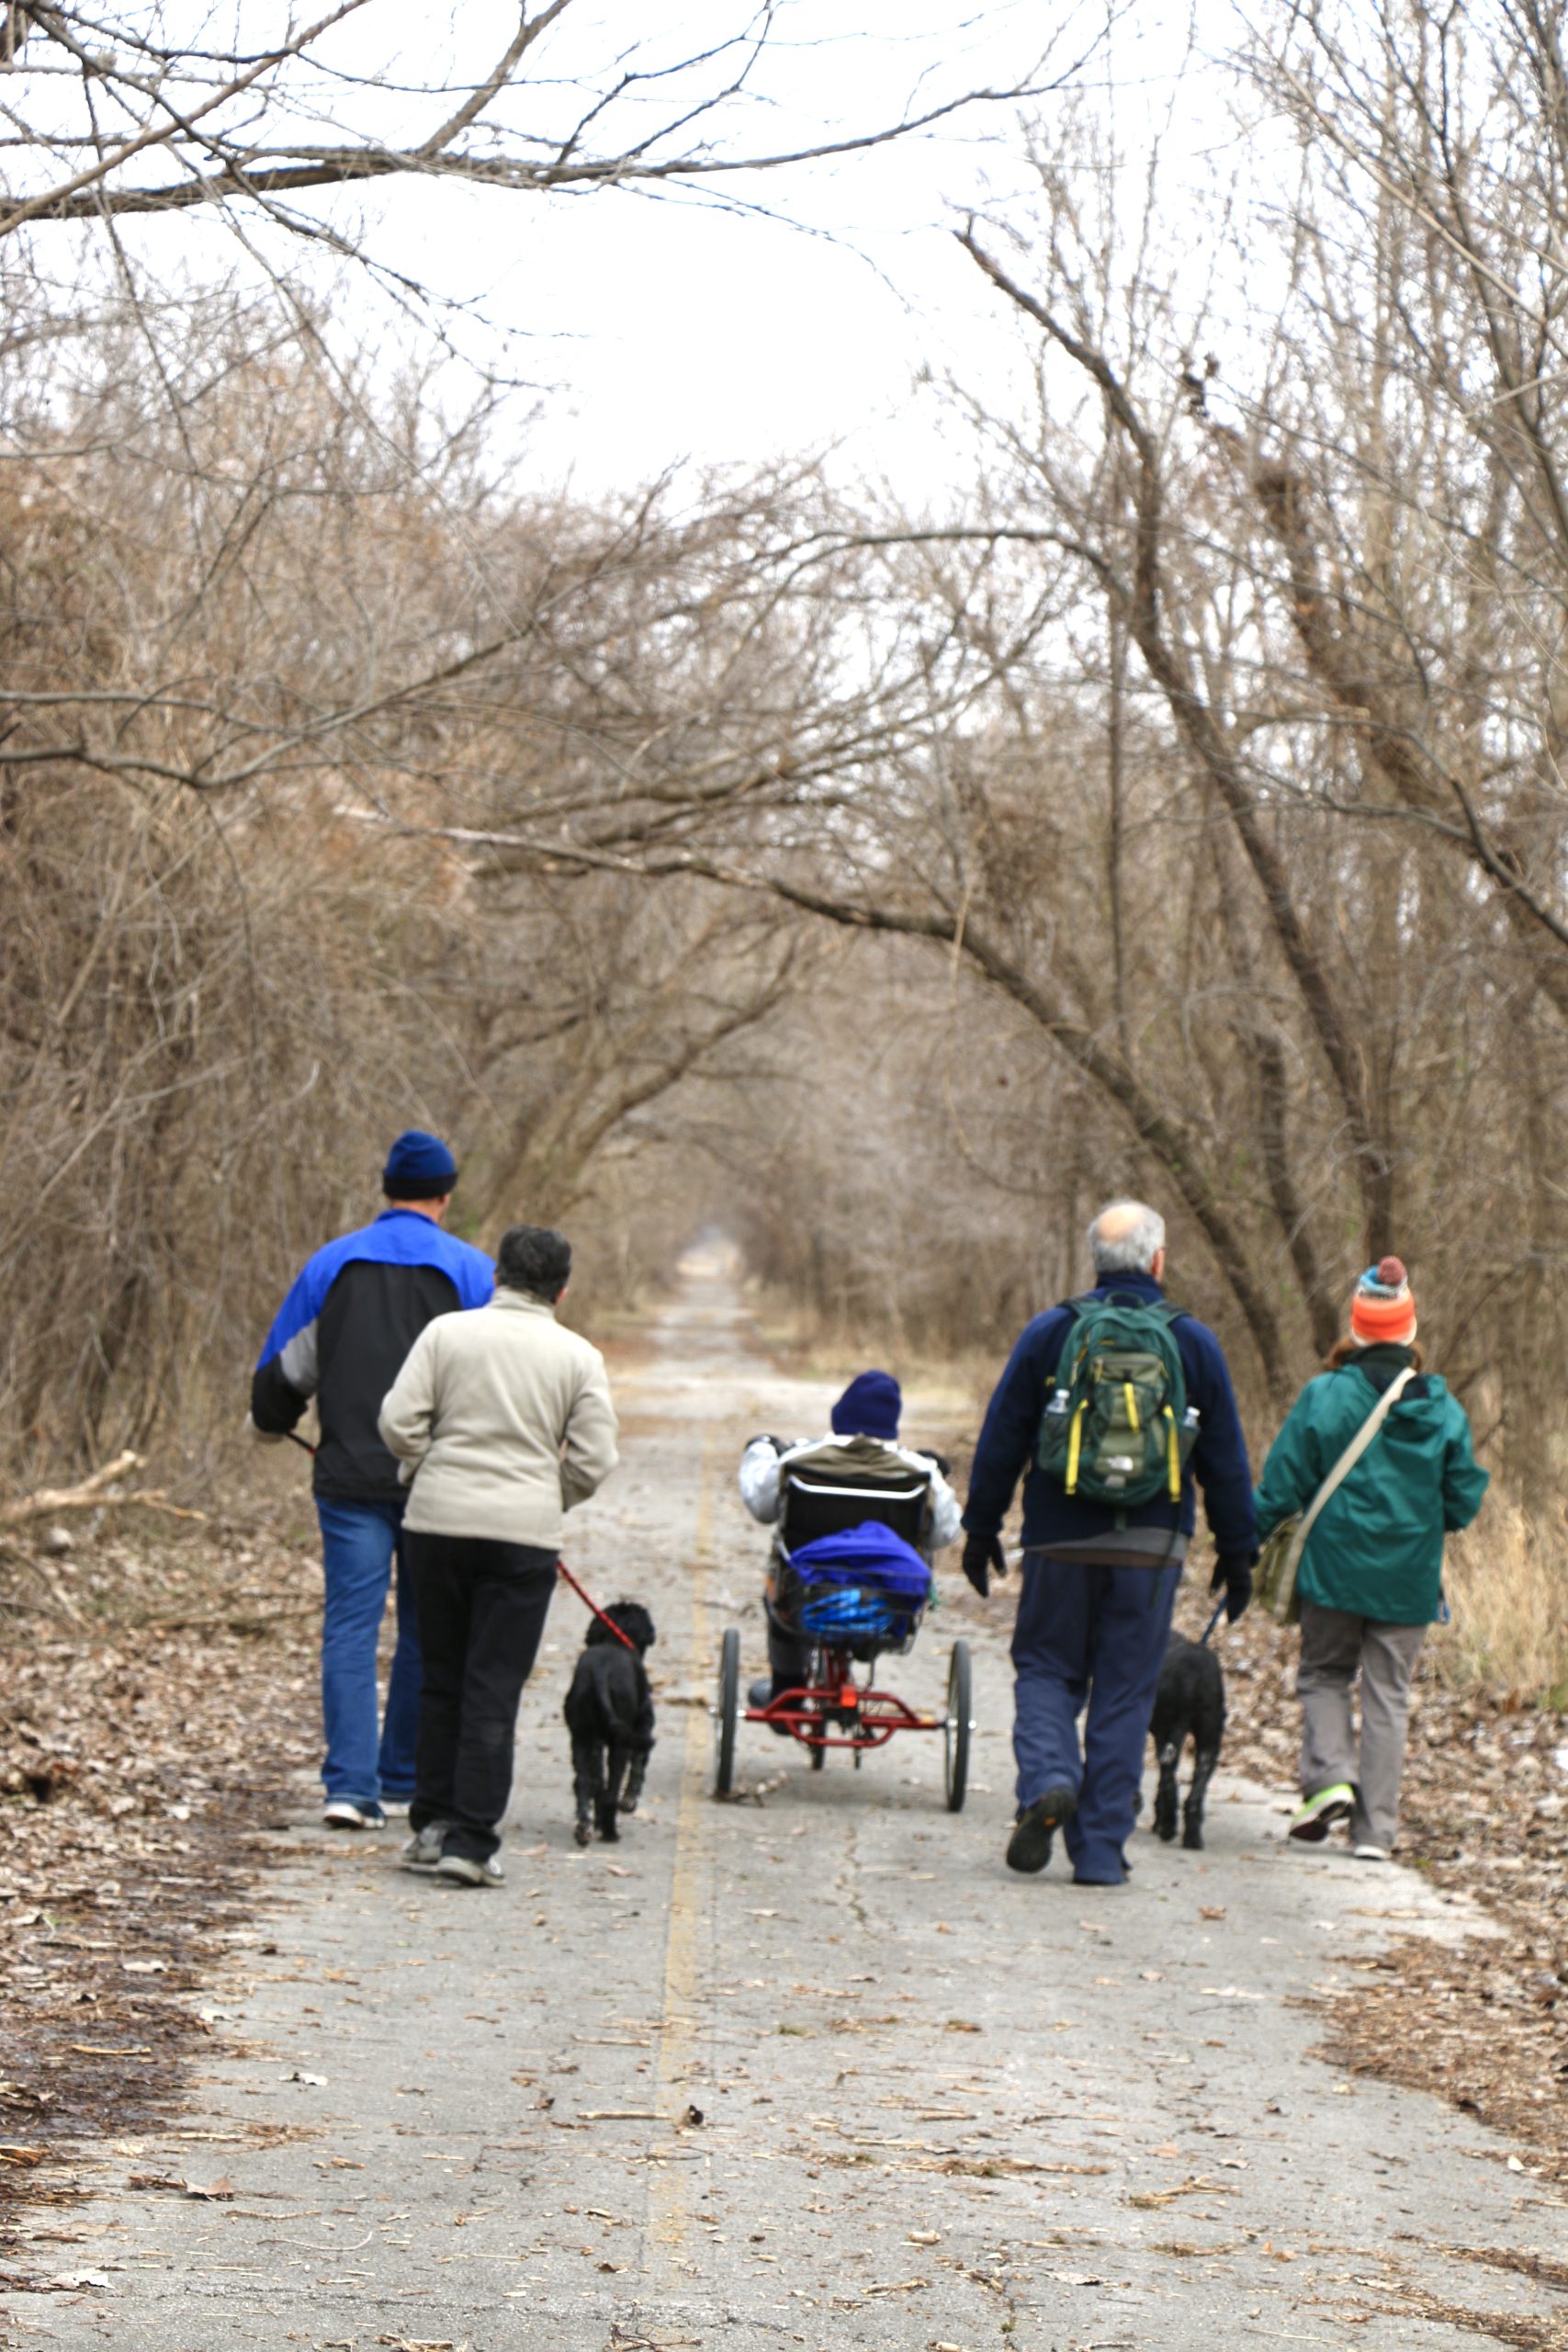 A group of people walking on a wooded trail, with someone on scooter, and dog.